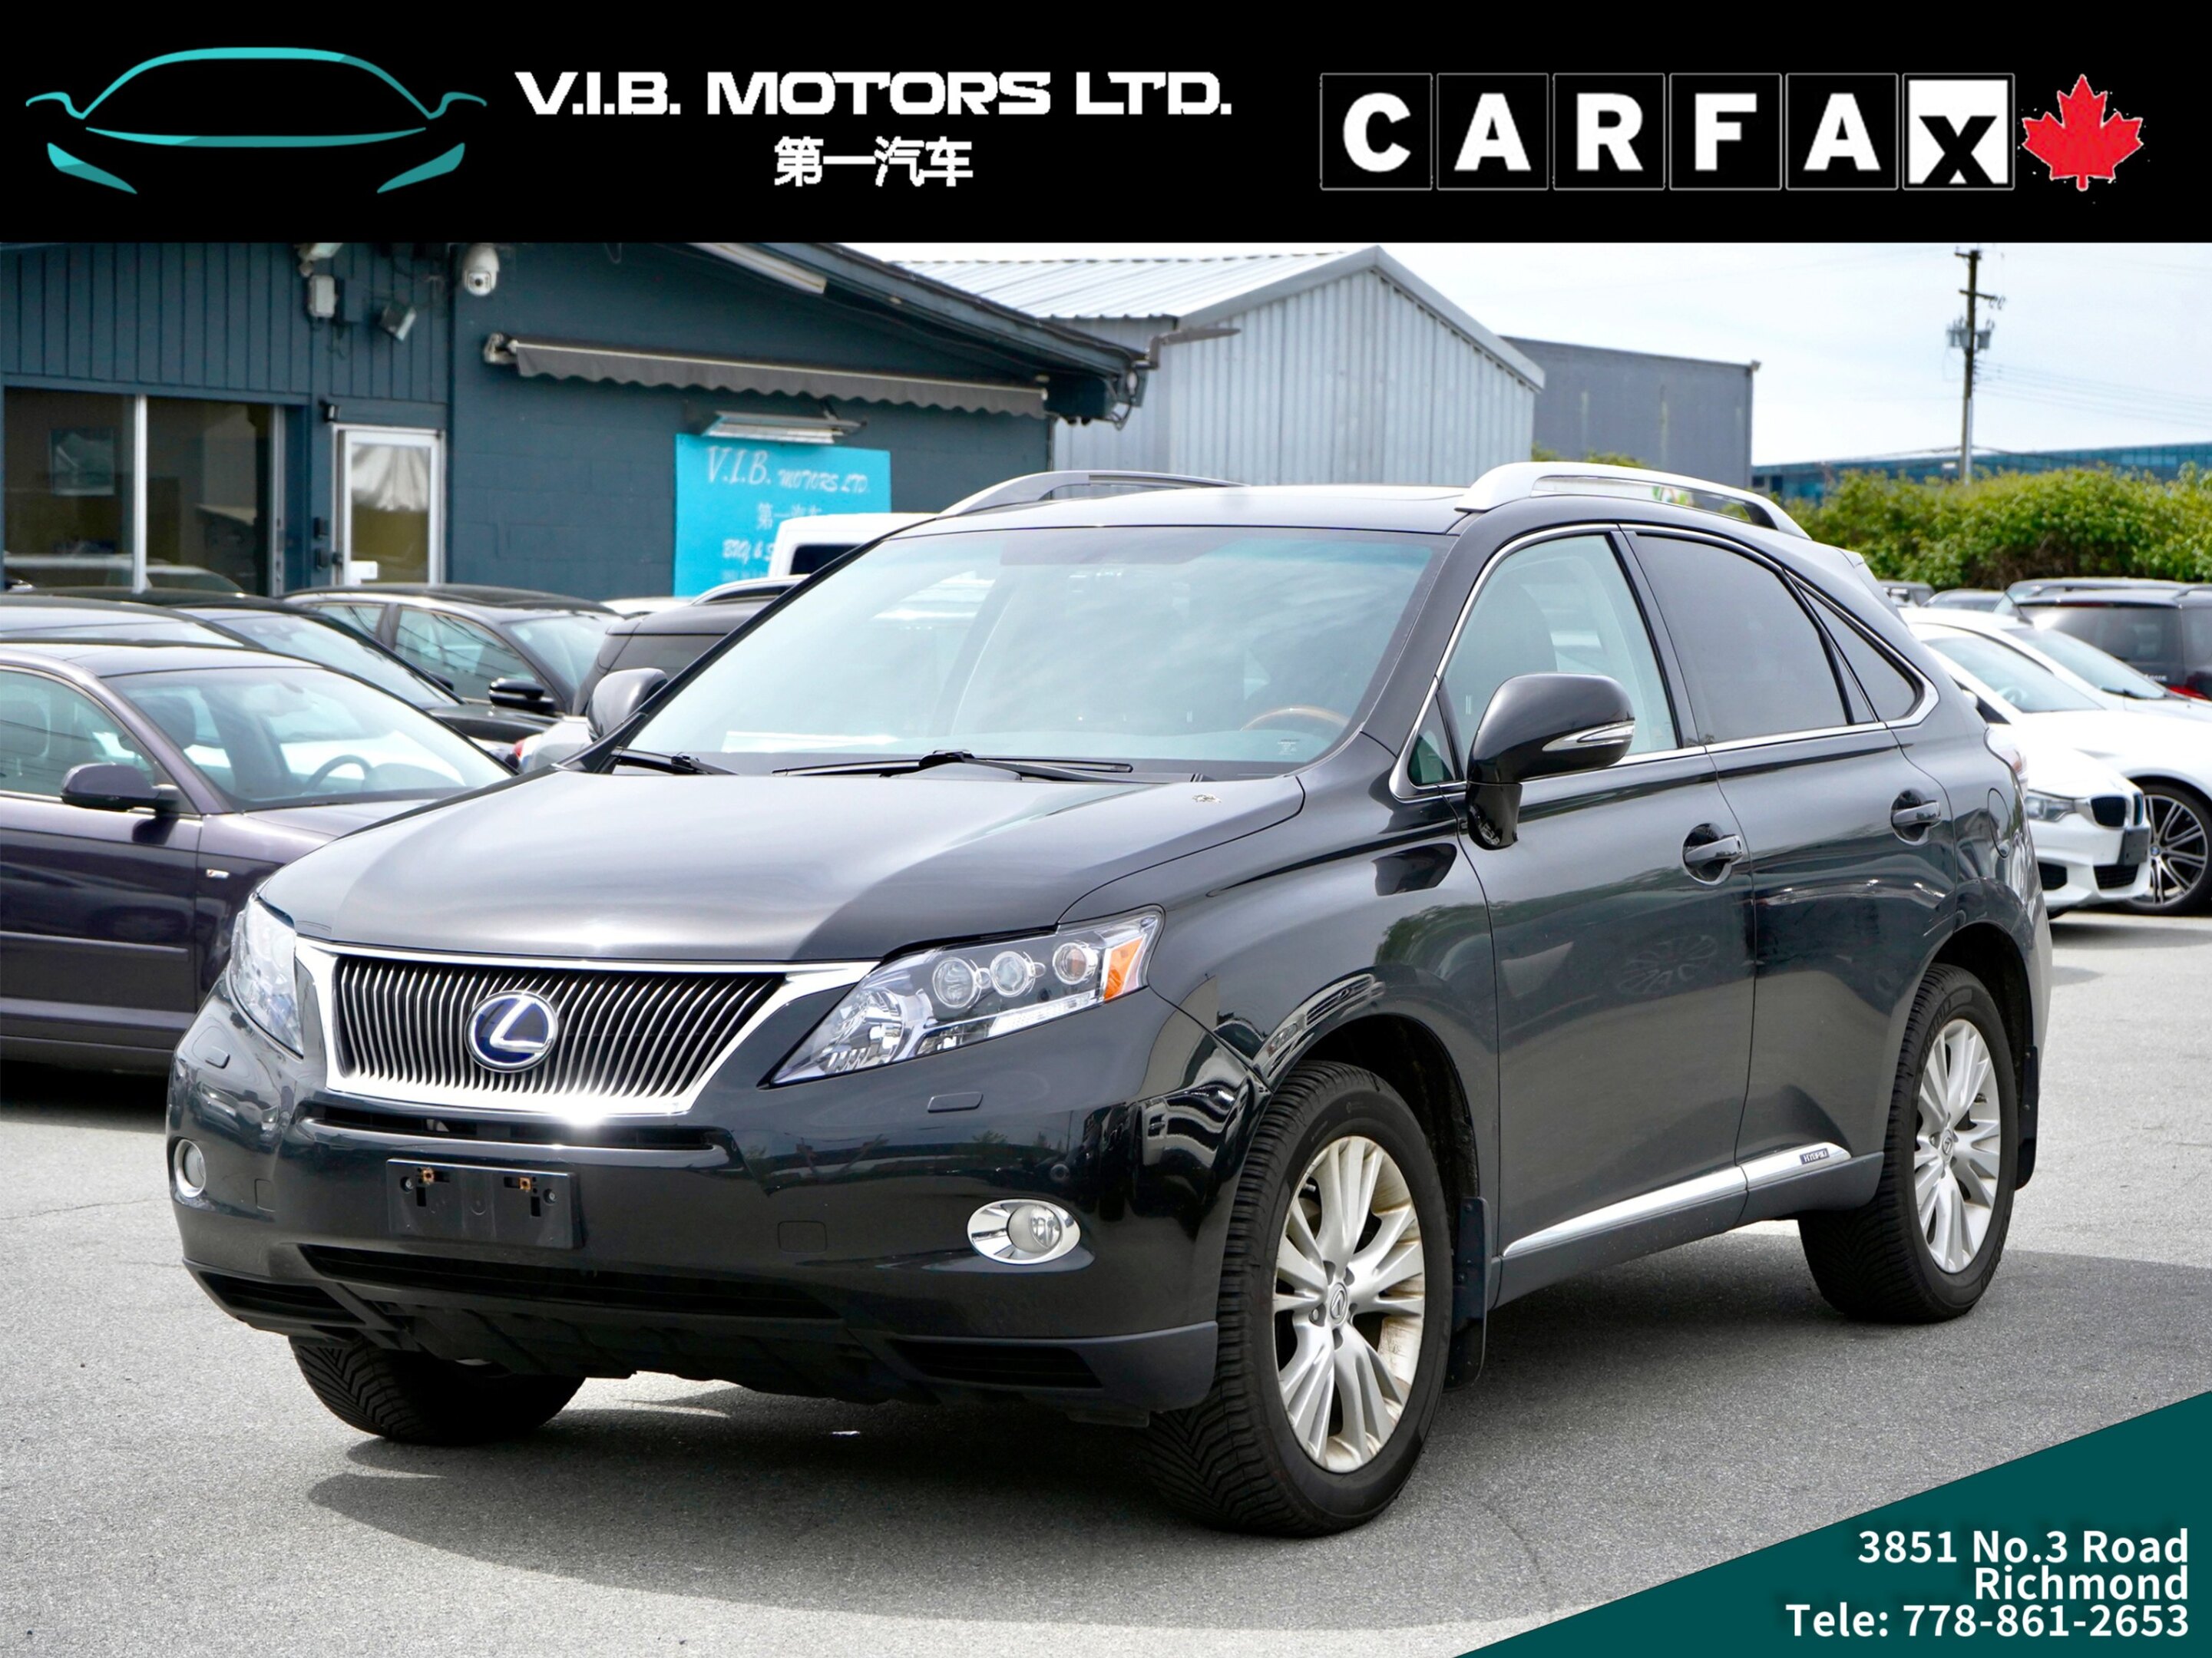 2011 Lexus RX 450H AWD 4dr Hybrid/ 0 ACCIDENT/ BC LOCAL/ LOW MILEAGE/